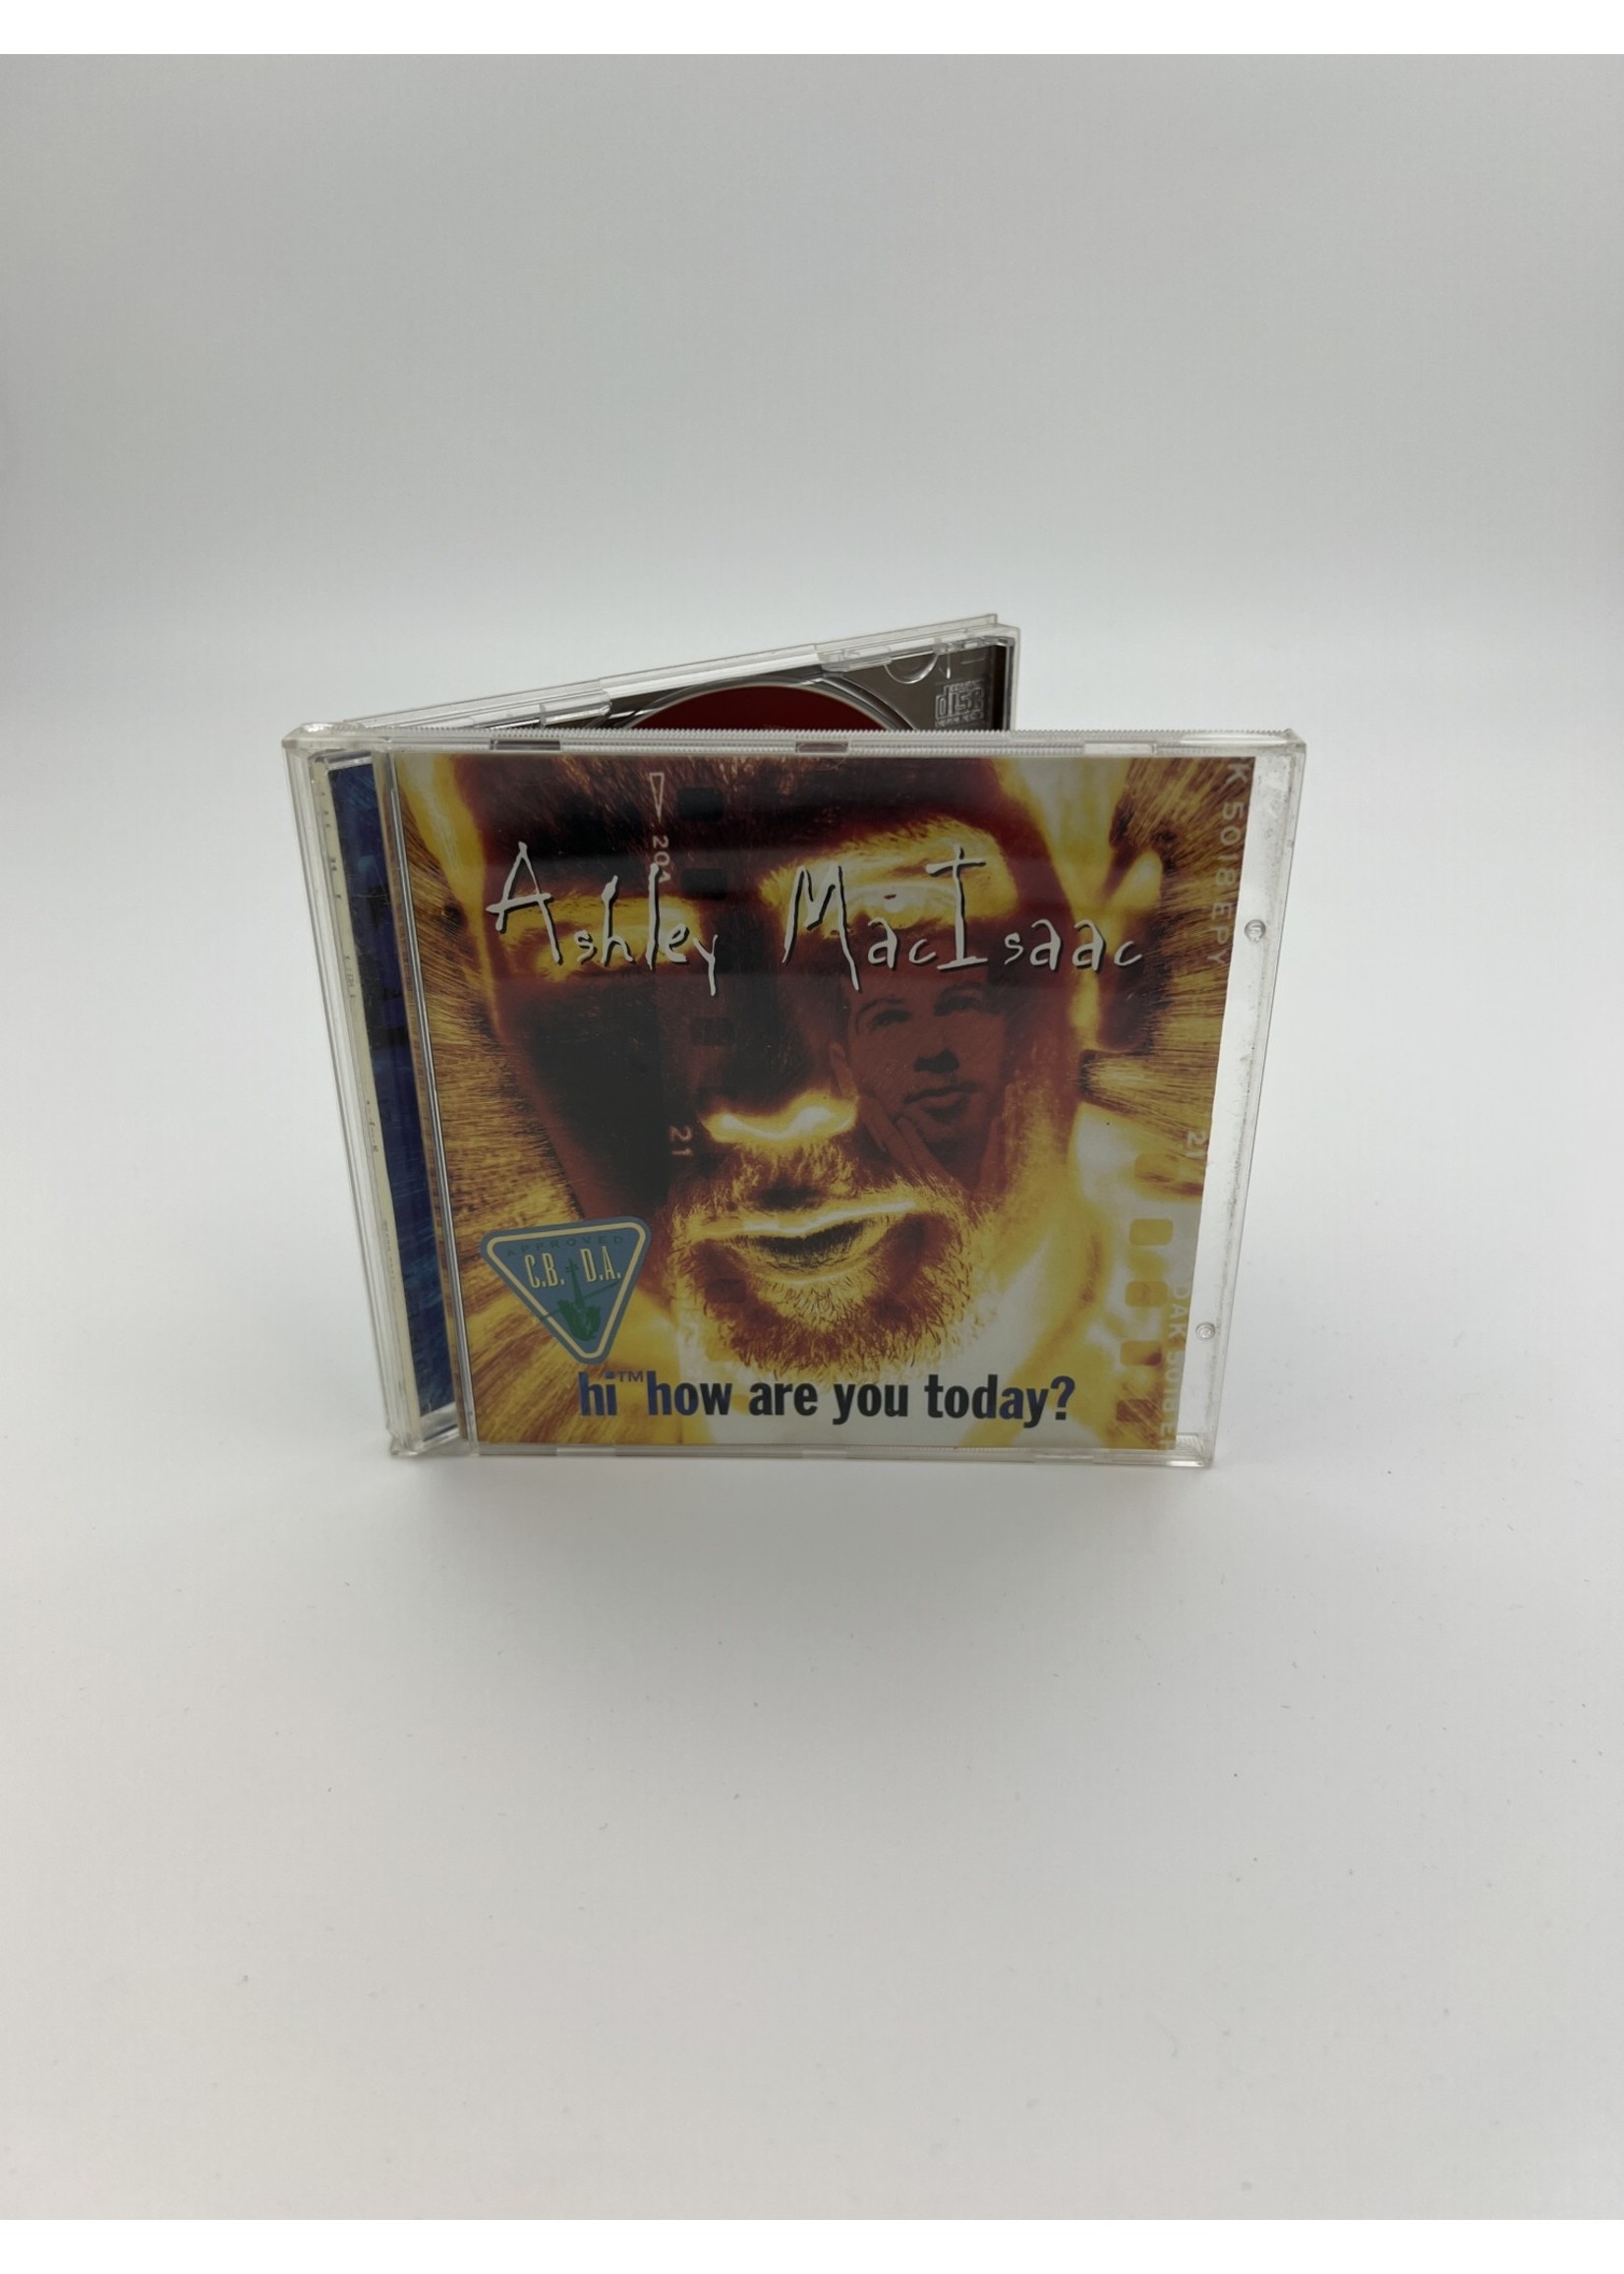 CD Ashley Macisaac Hi How Are You Today Cd